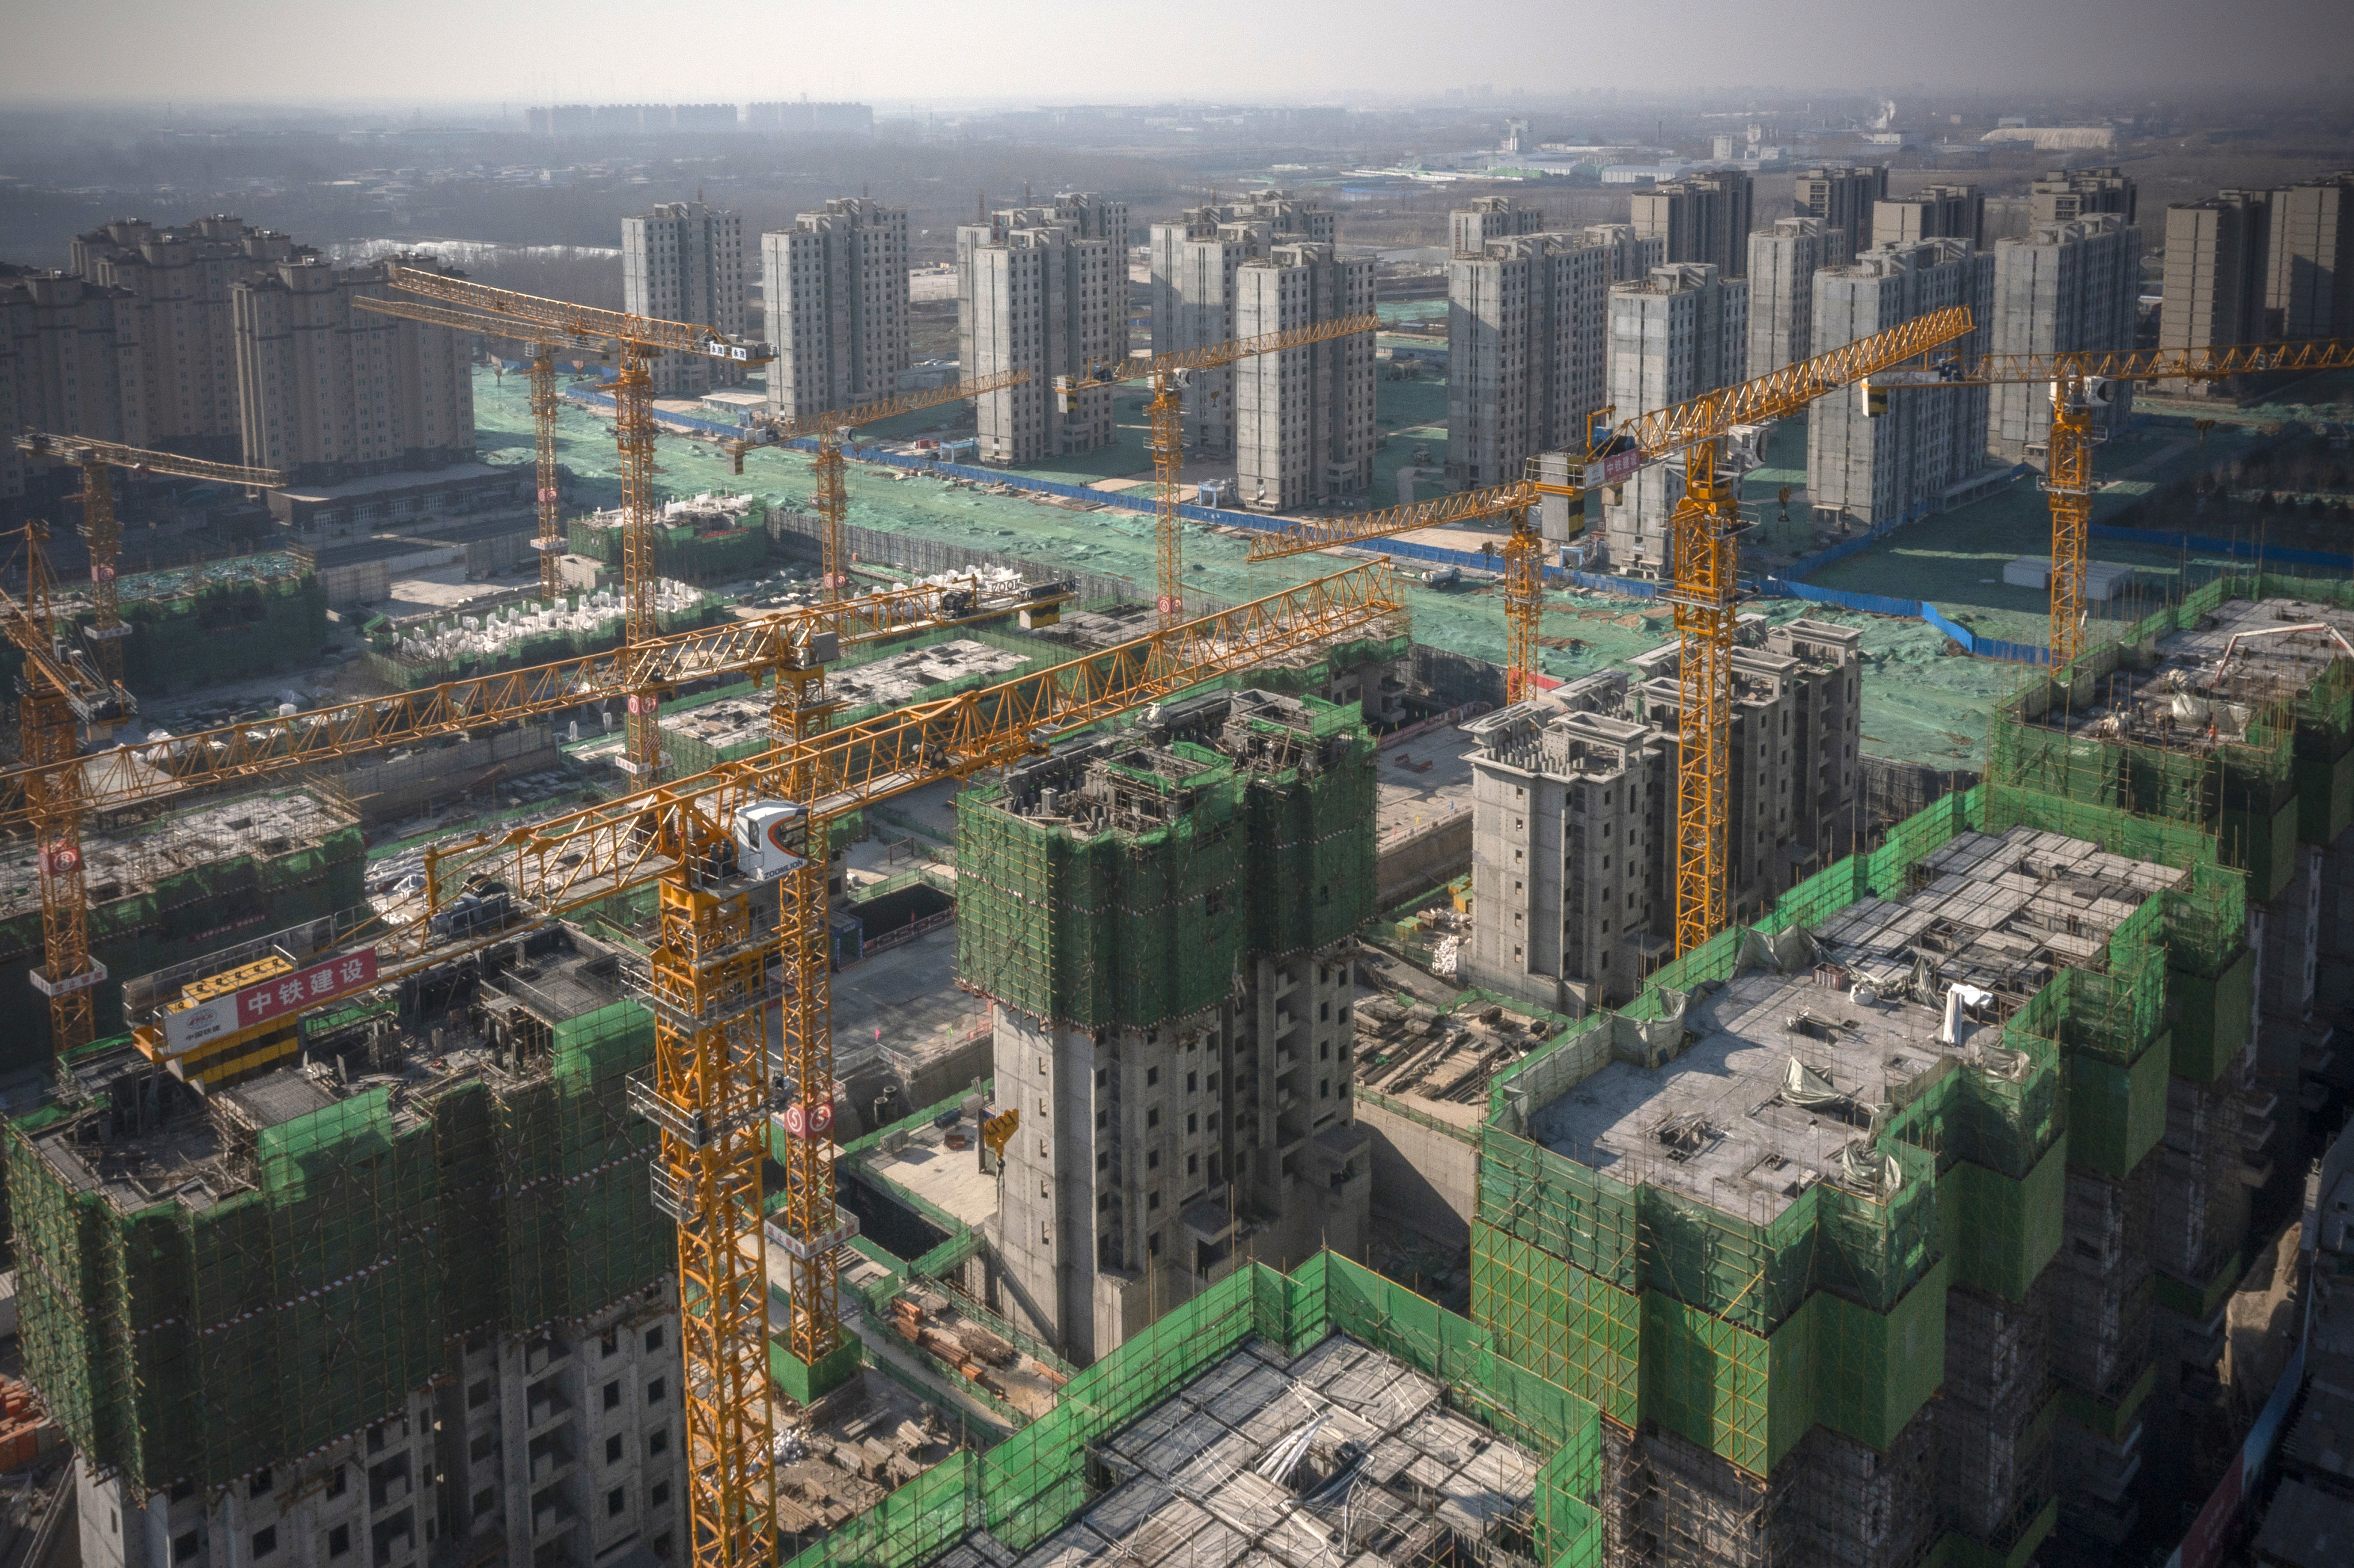 A construction site in Beijing. The importance of Asia-Pacific’s real estate markets to sustainability is underlined by the fact that the region now accounts for 20 out of the world’s 36 megacities with populations of more than 10 million. Its urban population is set to grow further, from 2.3 billion in 2019 to nearly 3.5 billion by 2050, a 52 per cent increase. Photo: Bloomberg